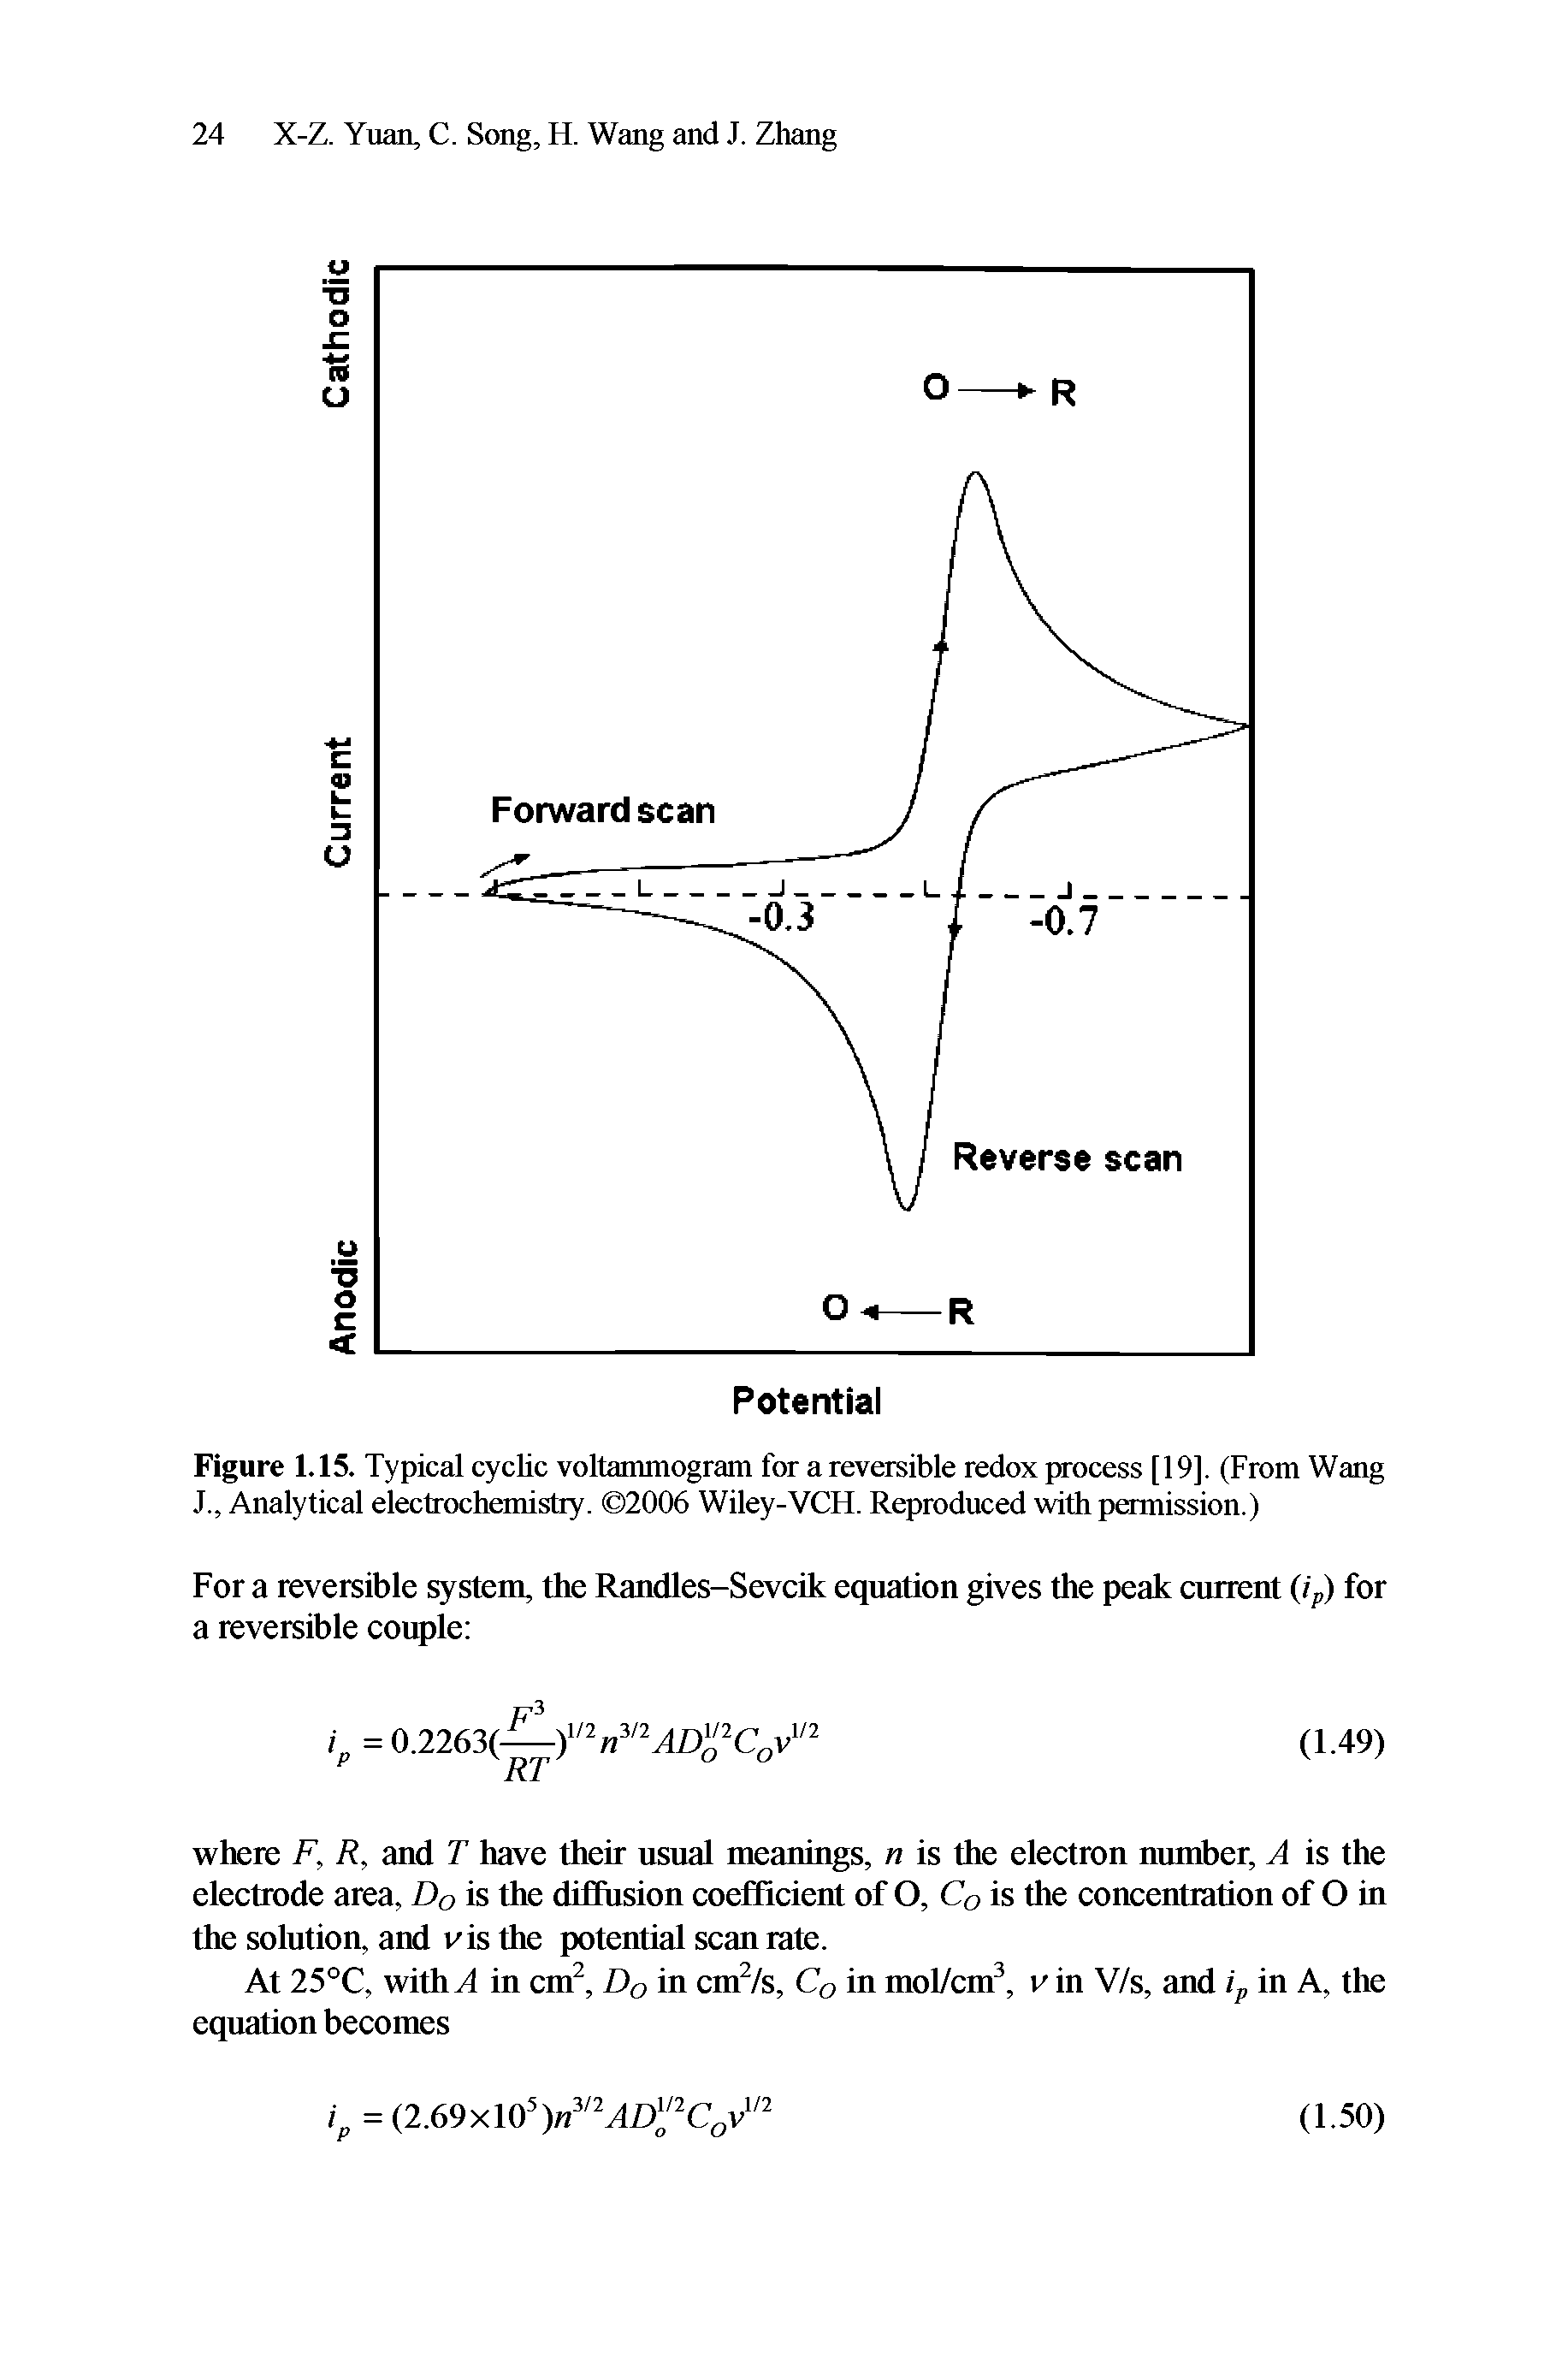 Figure 1.15. Typical cyclic voltammogram for a reversible redox process [19]. (From Wang J., Analytical electrochemistry. 2006 Wiley-VCH. Reproduced with permission.)...